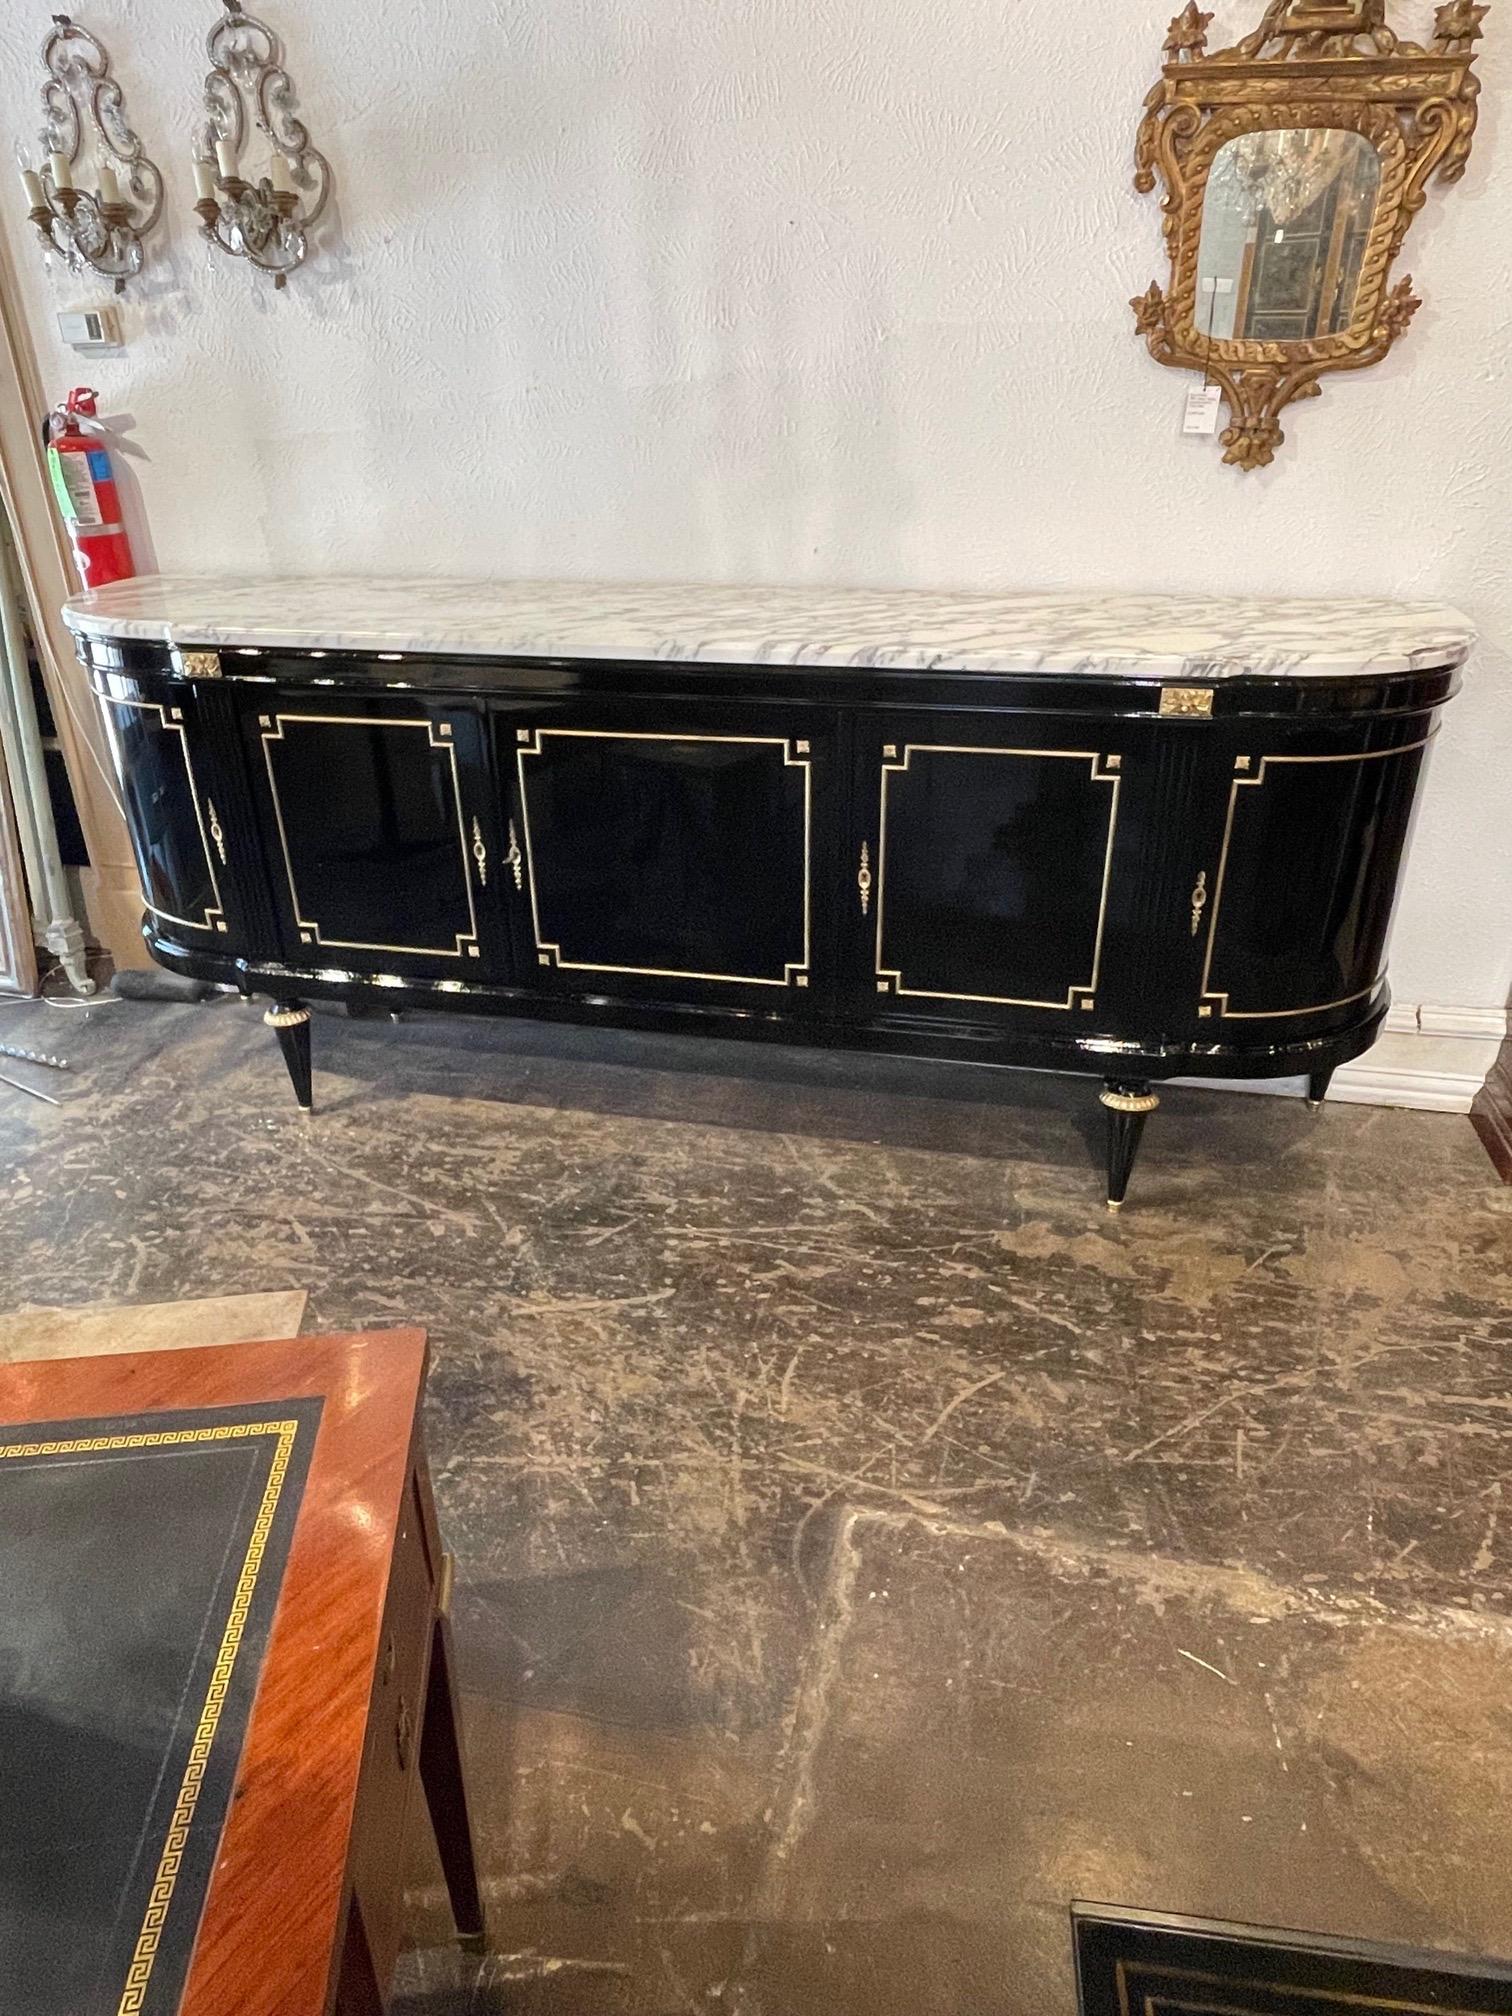 Gorgeous French Louis XVI style black lacquered side board with Marble top and gilt brass trim. Superb quality and tons of storage as well as an expansive serving area. Also, the inside is beautiful as well. Creates a very impressive sleek look!